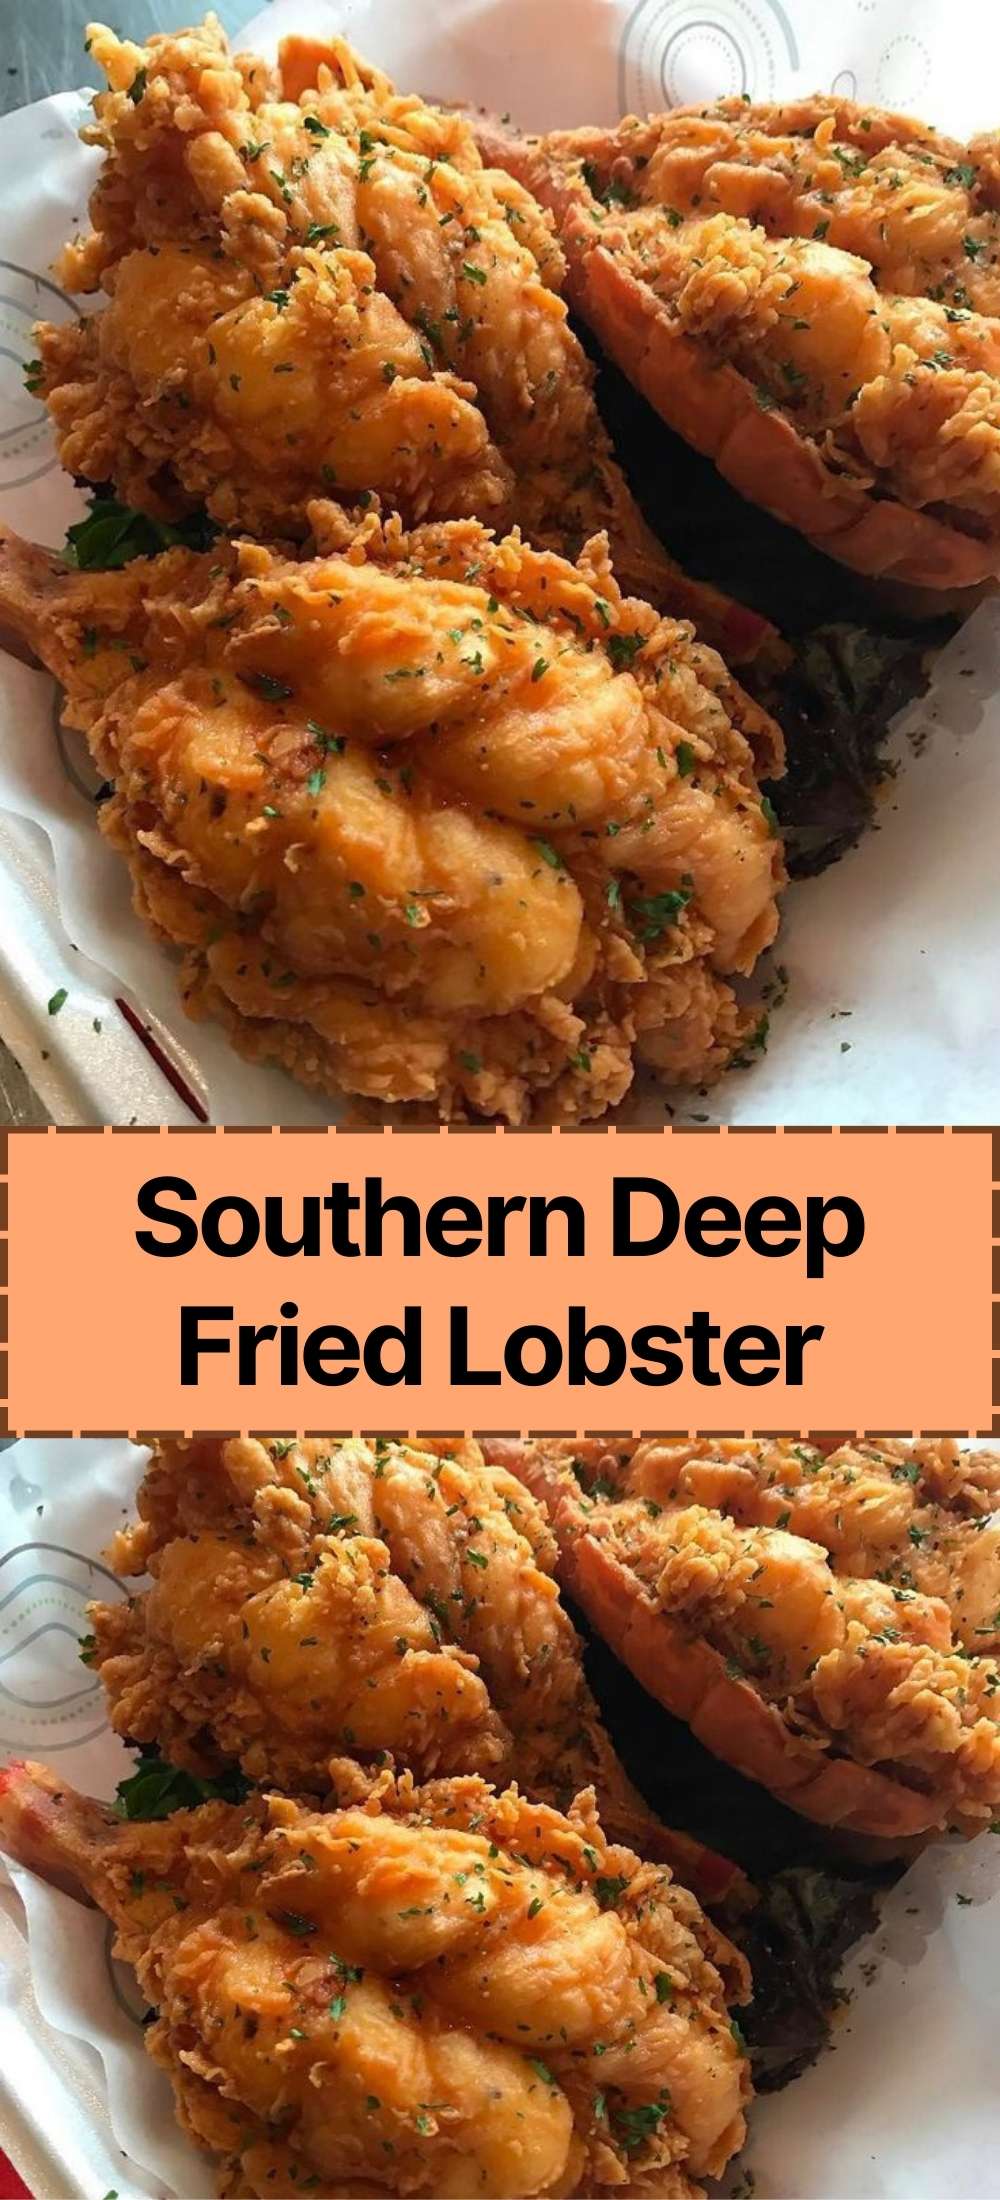 Southern Deep Fried Lobster